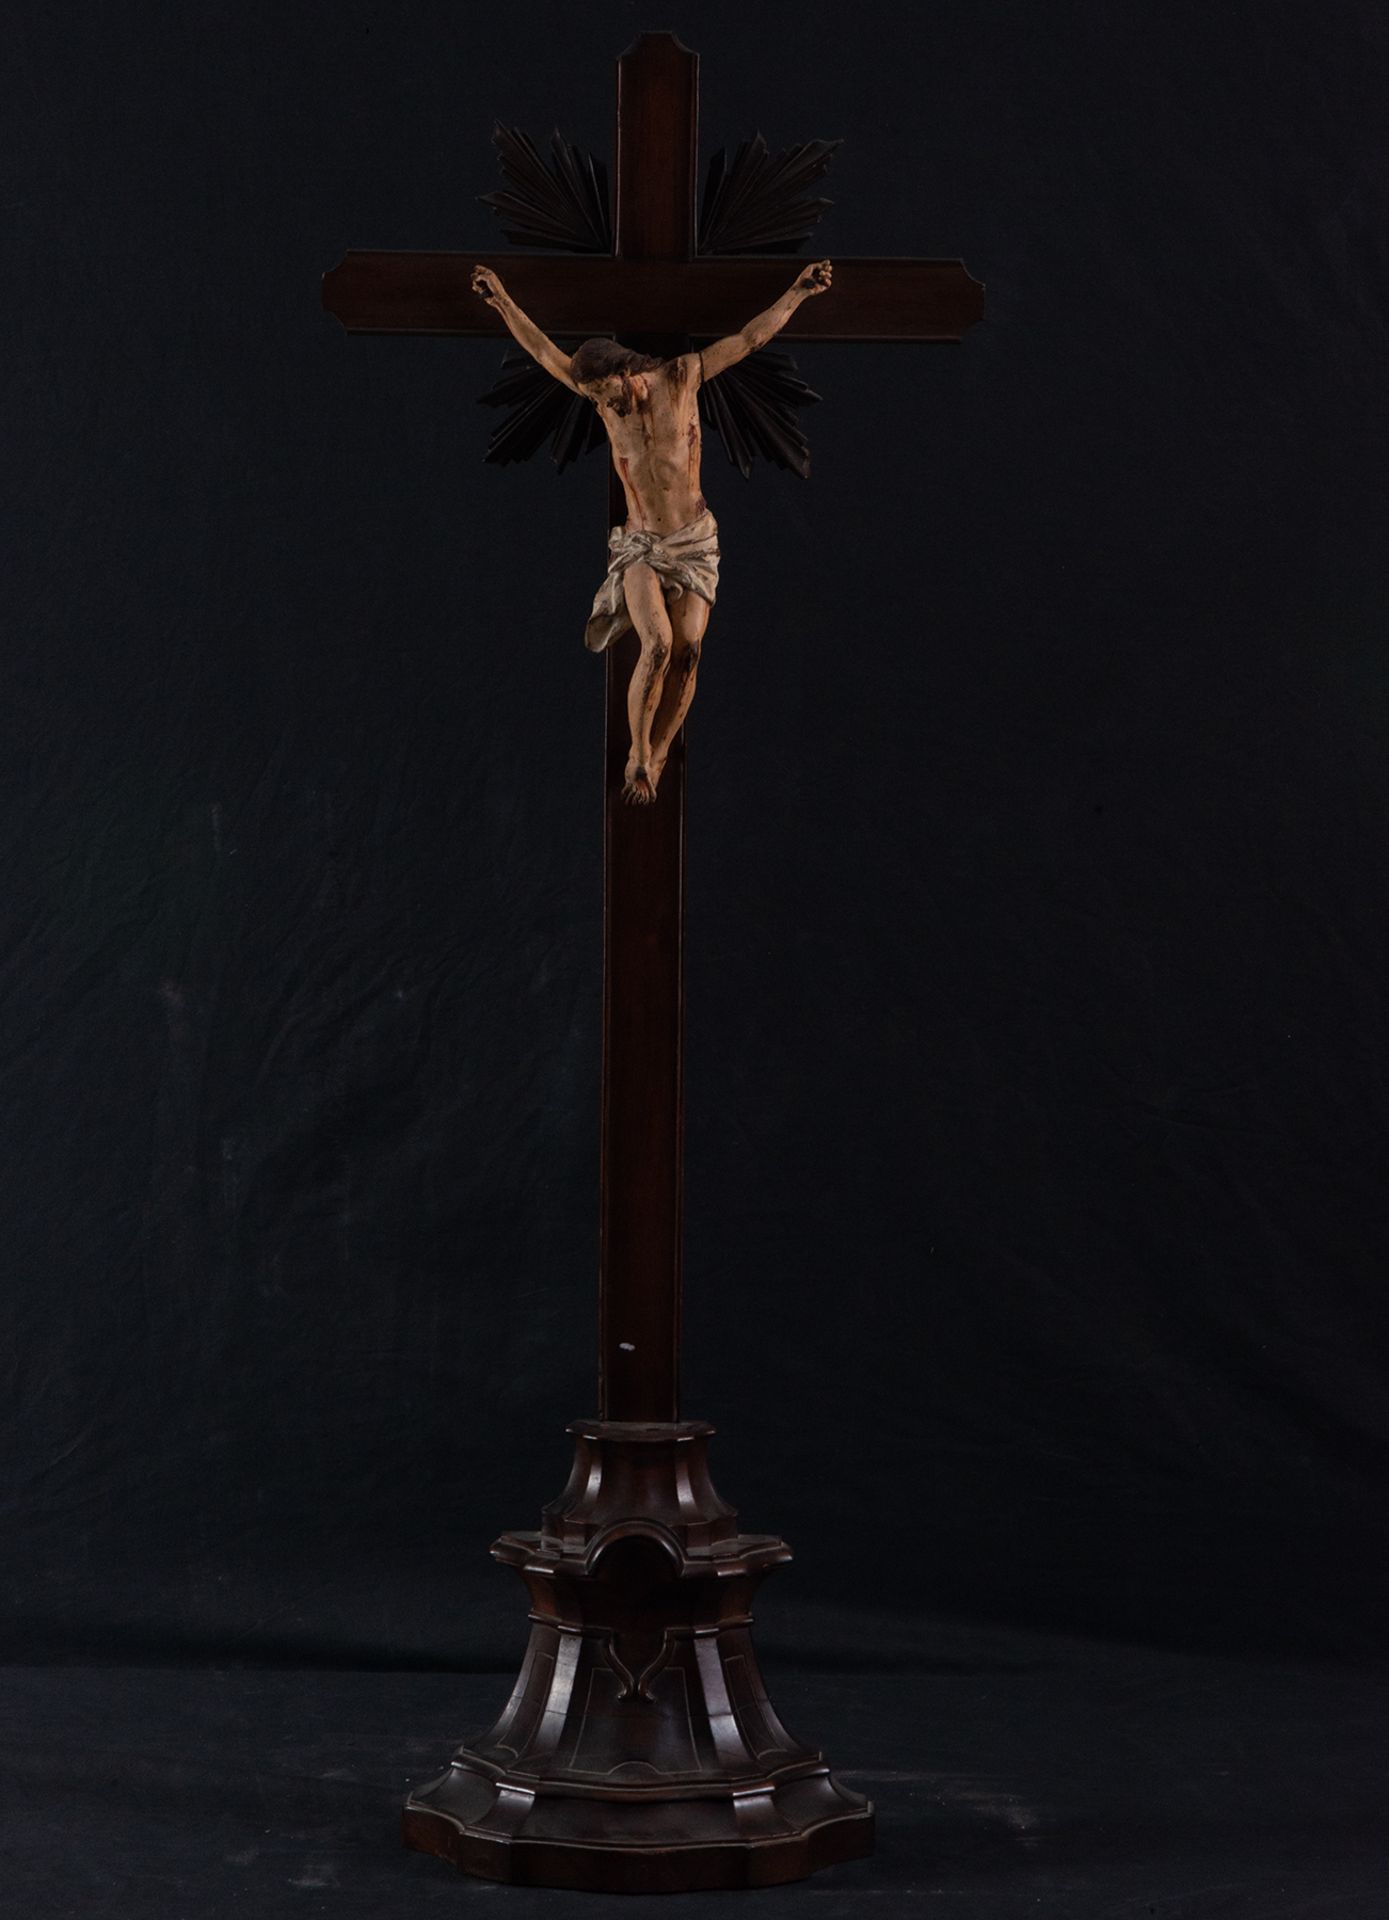 Christ on the Cross, colonial Quito or Guatemalan work from the 18th century